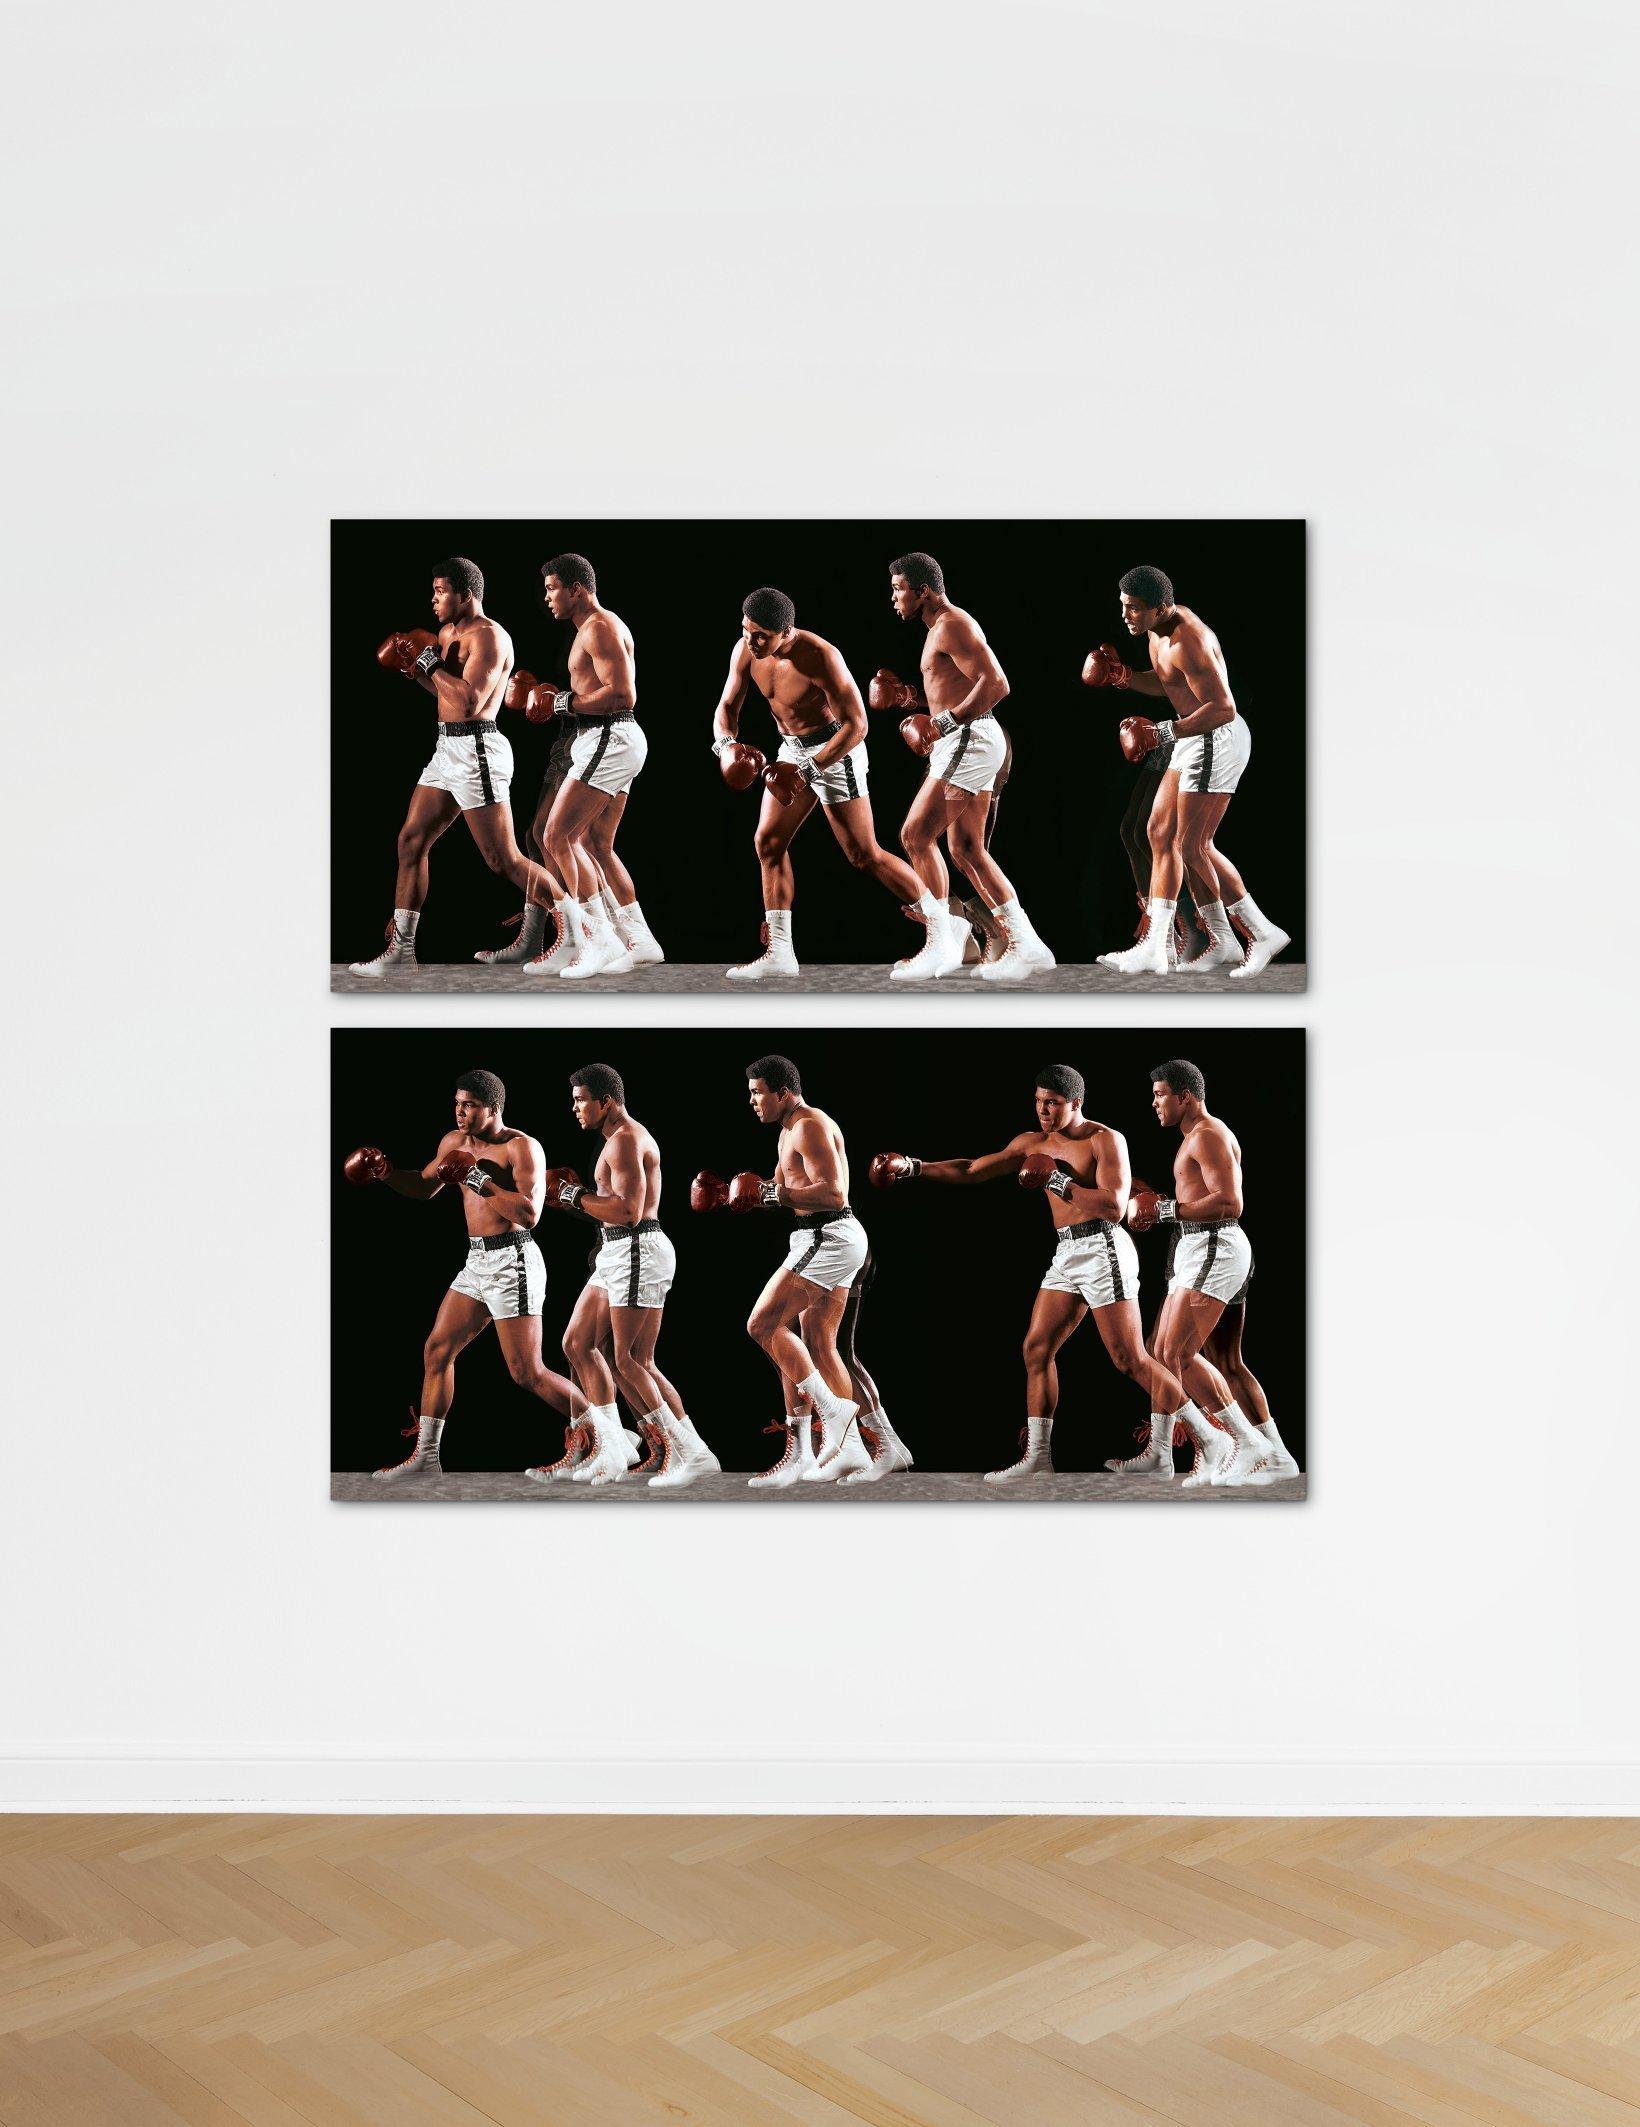 Ali Invents the Double-Clutch Shuffle, 1966, Photographic print, on Aluminum - Print by Neil Leifer